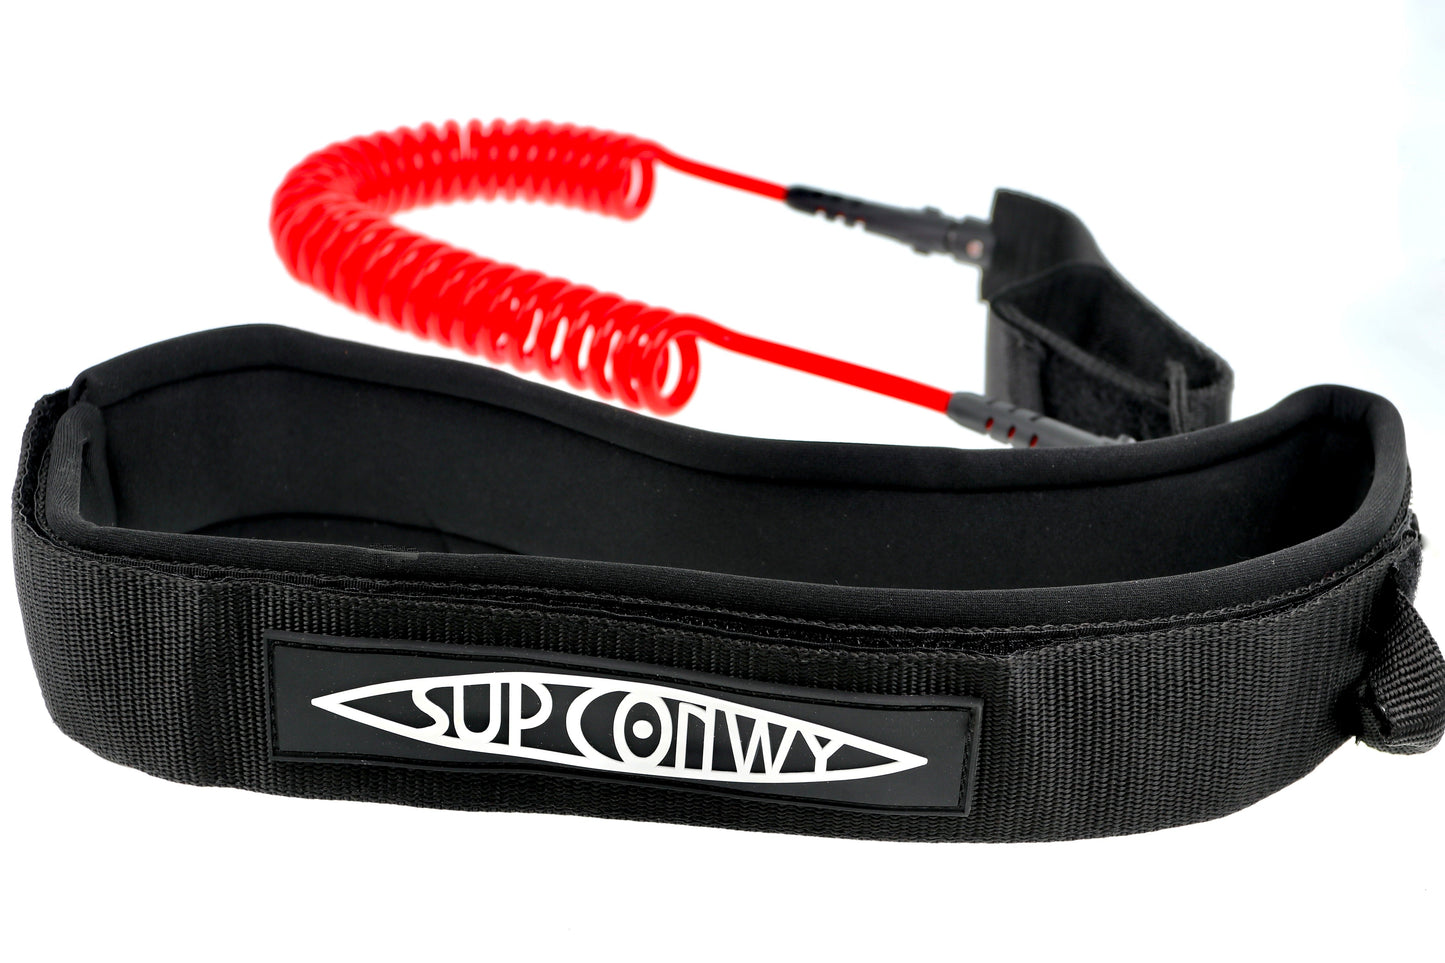 SUP Conwy Coil Waist Belt | Conwy Kayaks